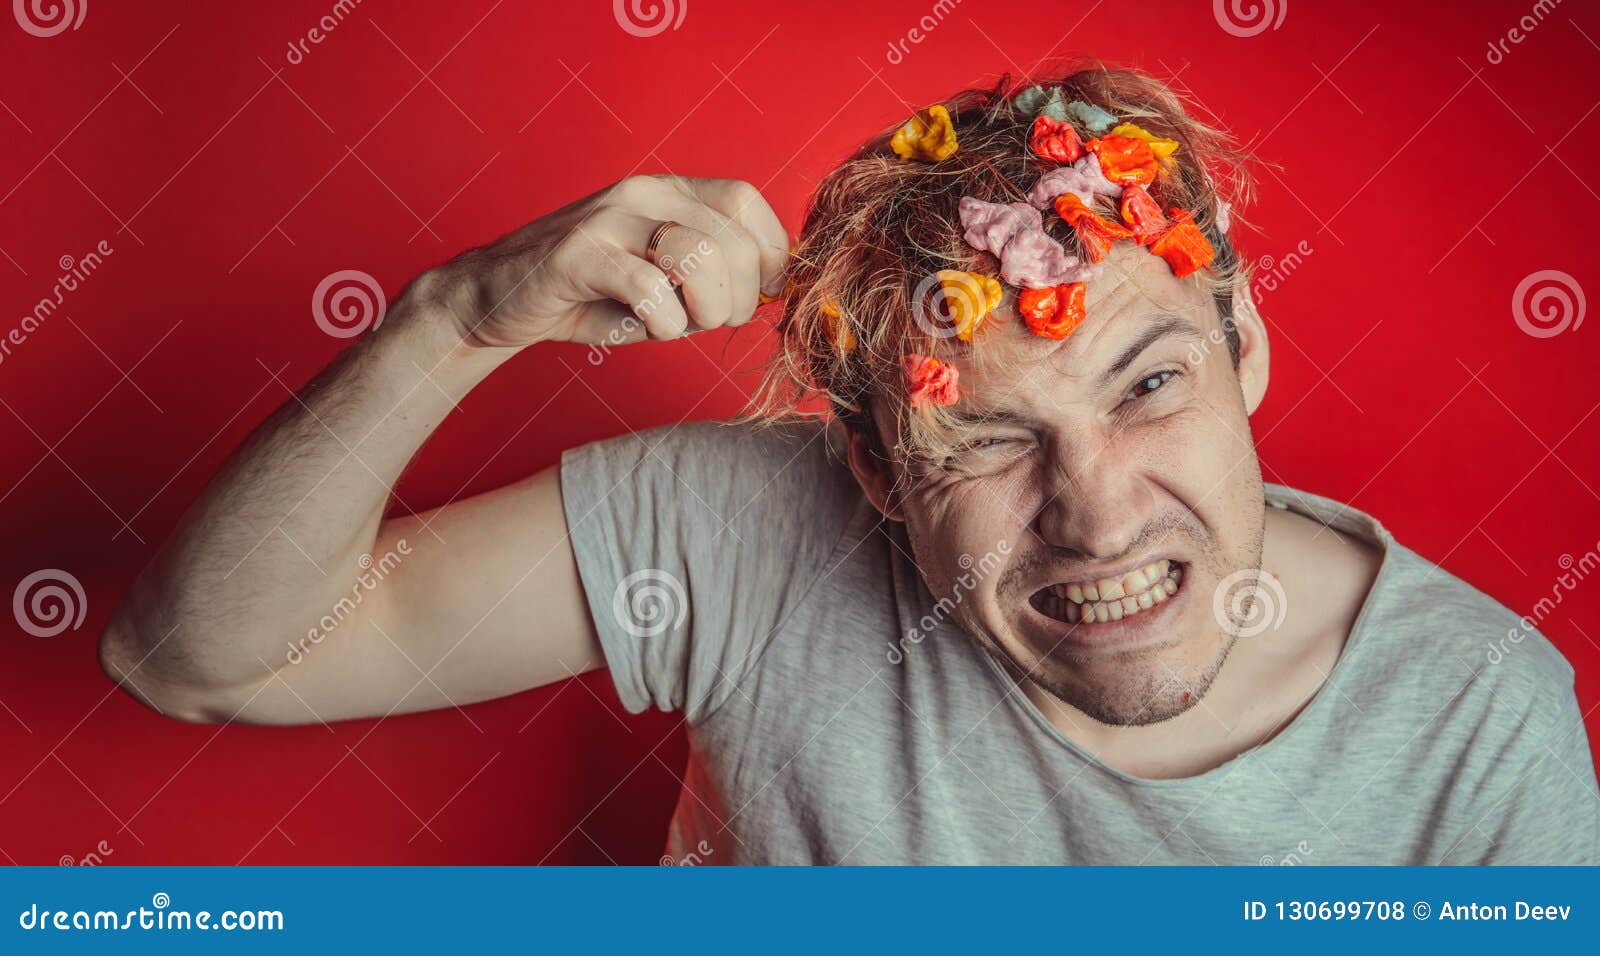 Gum in His Head. Portrait of Man with Chewing Gum in His Head. Man with Hair  Covered in Food Stock Photo - Image of adult, disgusting: 130699708